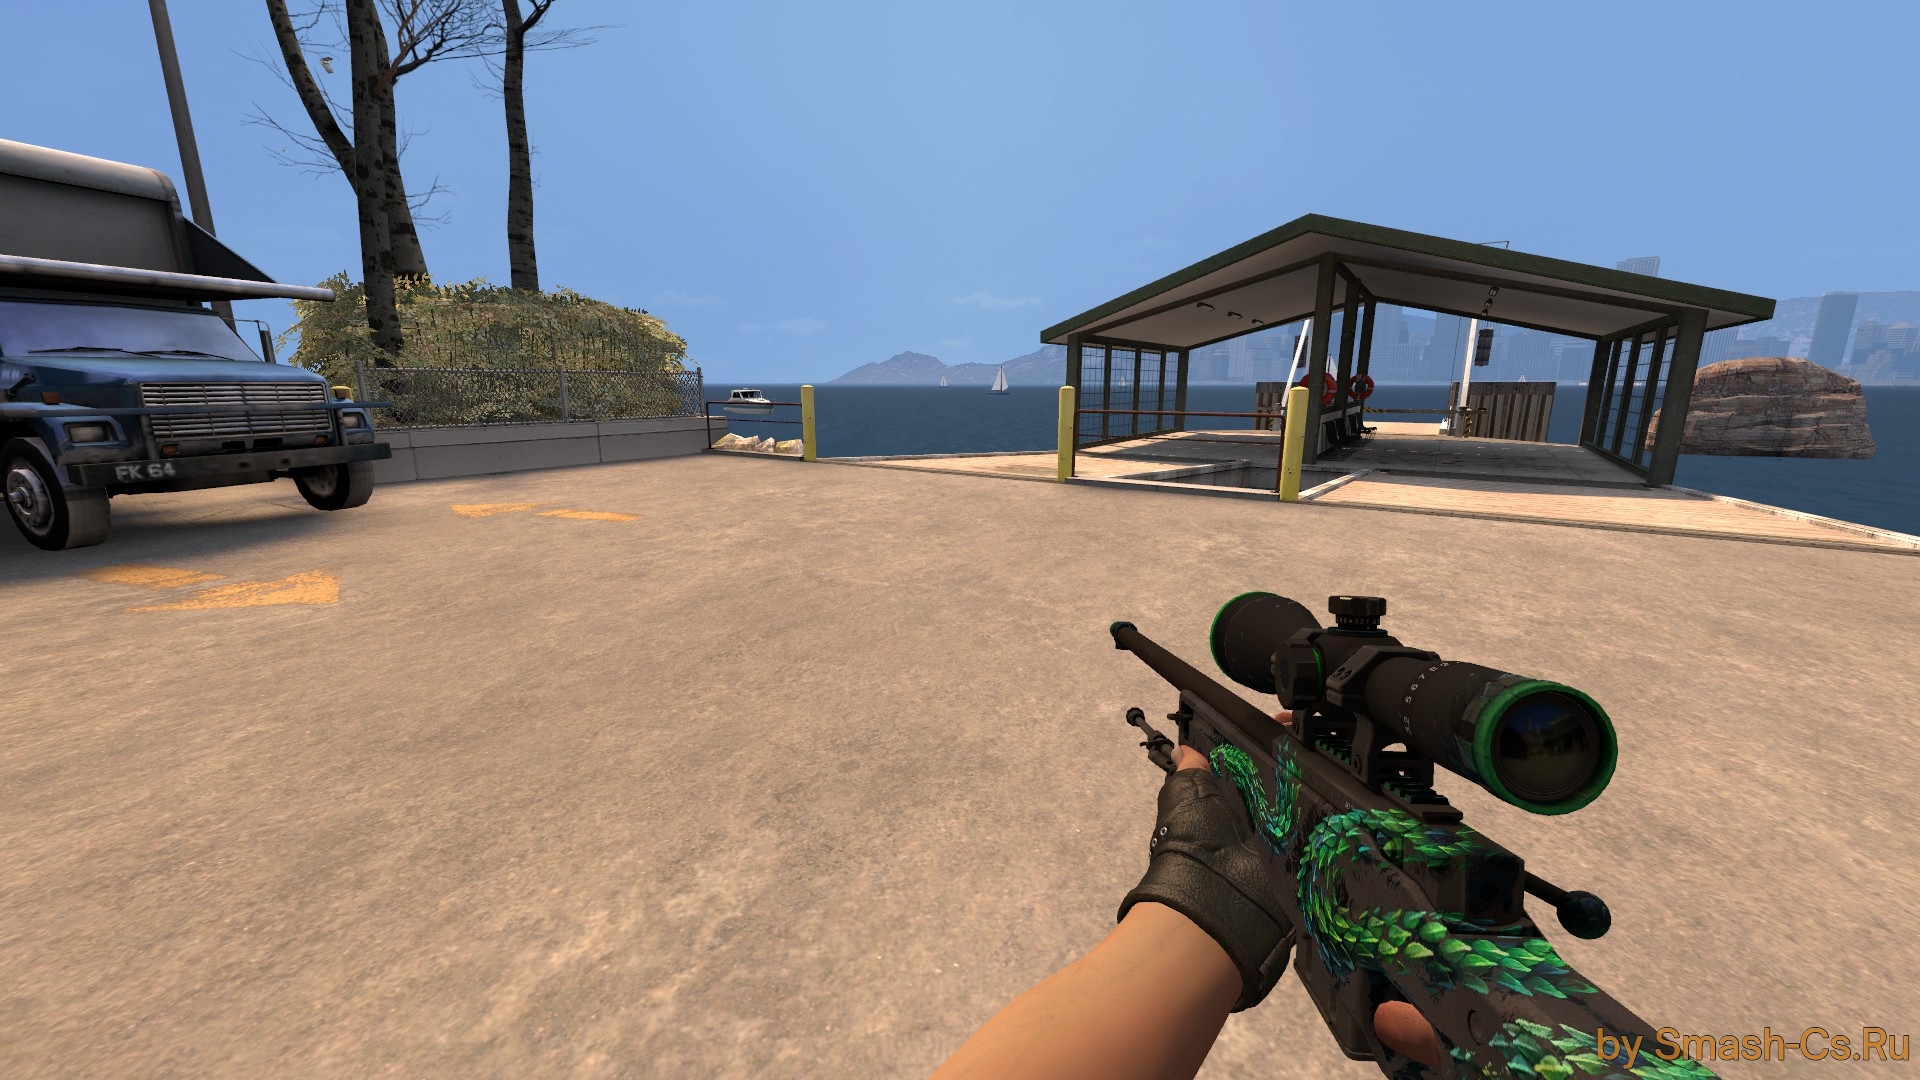 Steam Community :: Screenshot :: AWP  Atheris (Battle-Scarred) - Top #1 of  the BS. Float Value: 0.99994432926177978516